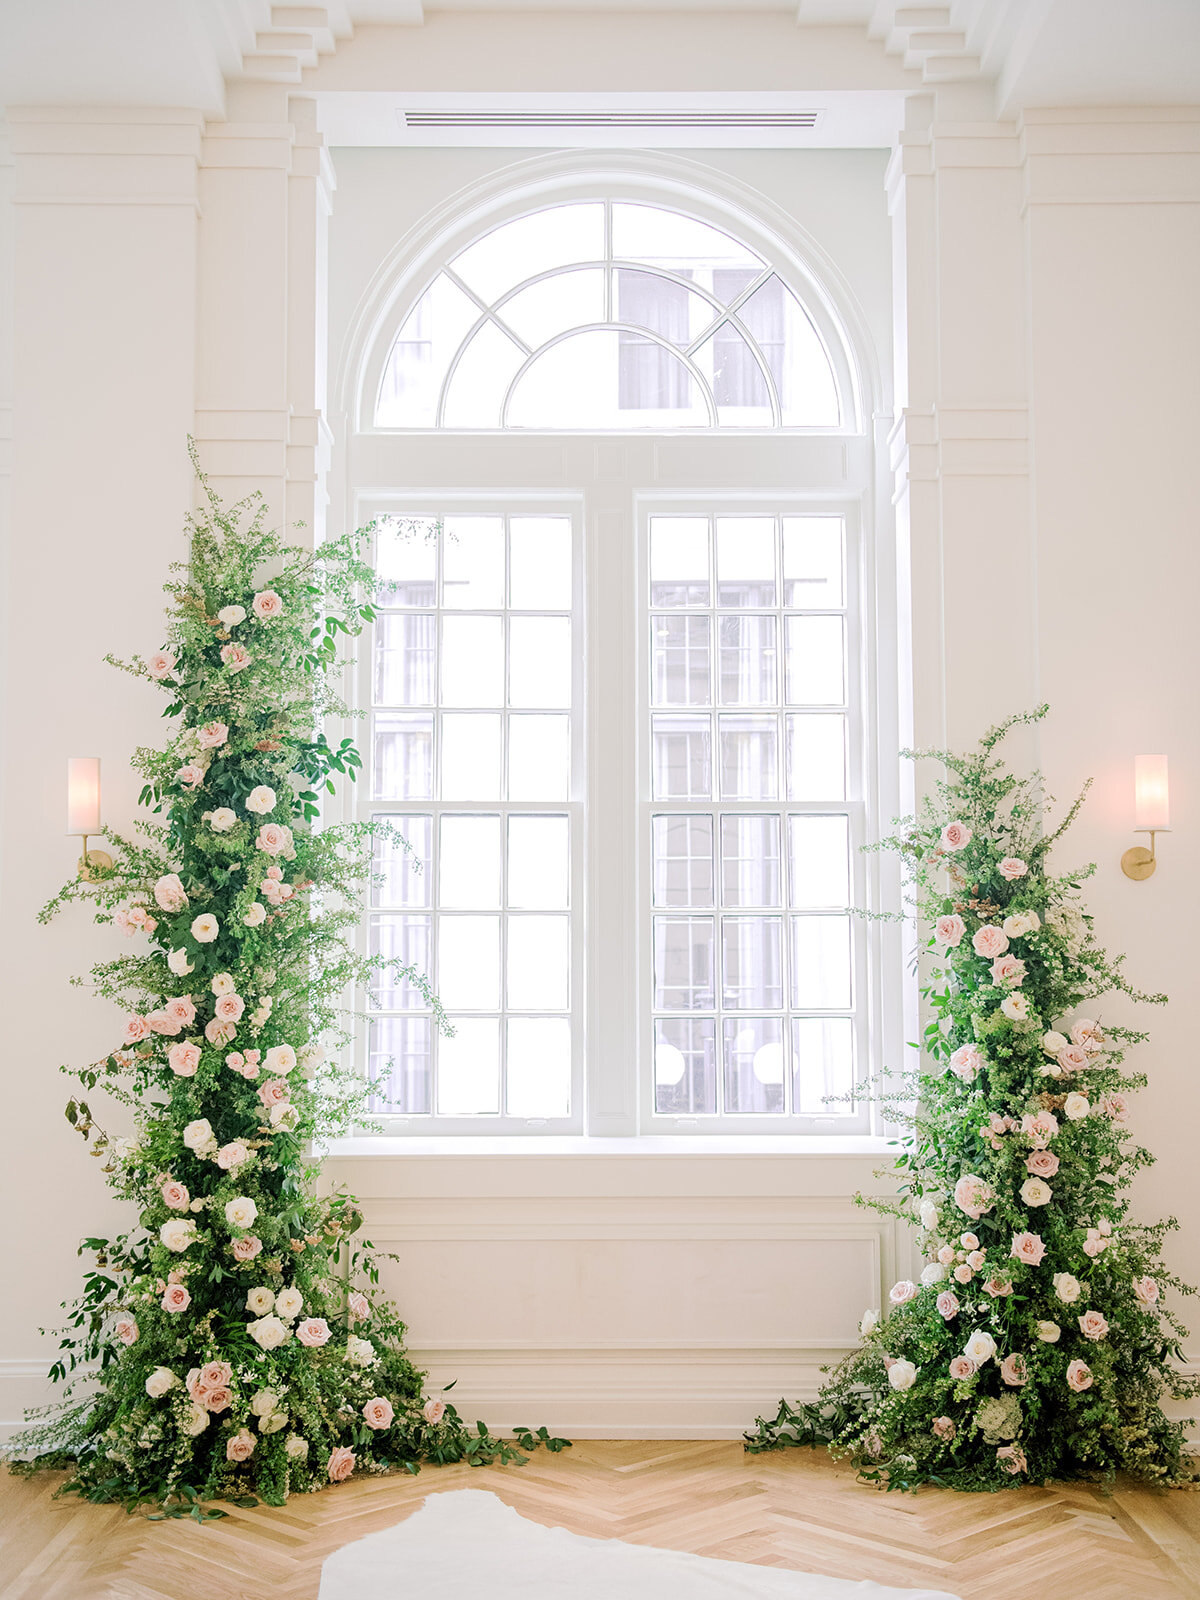 Top 3 Ways To Surprise and Delight Your Wedding Guests With Flowers